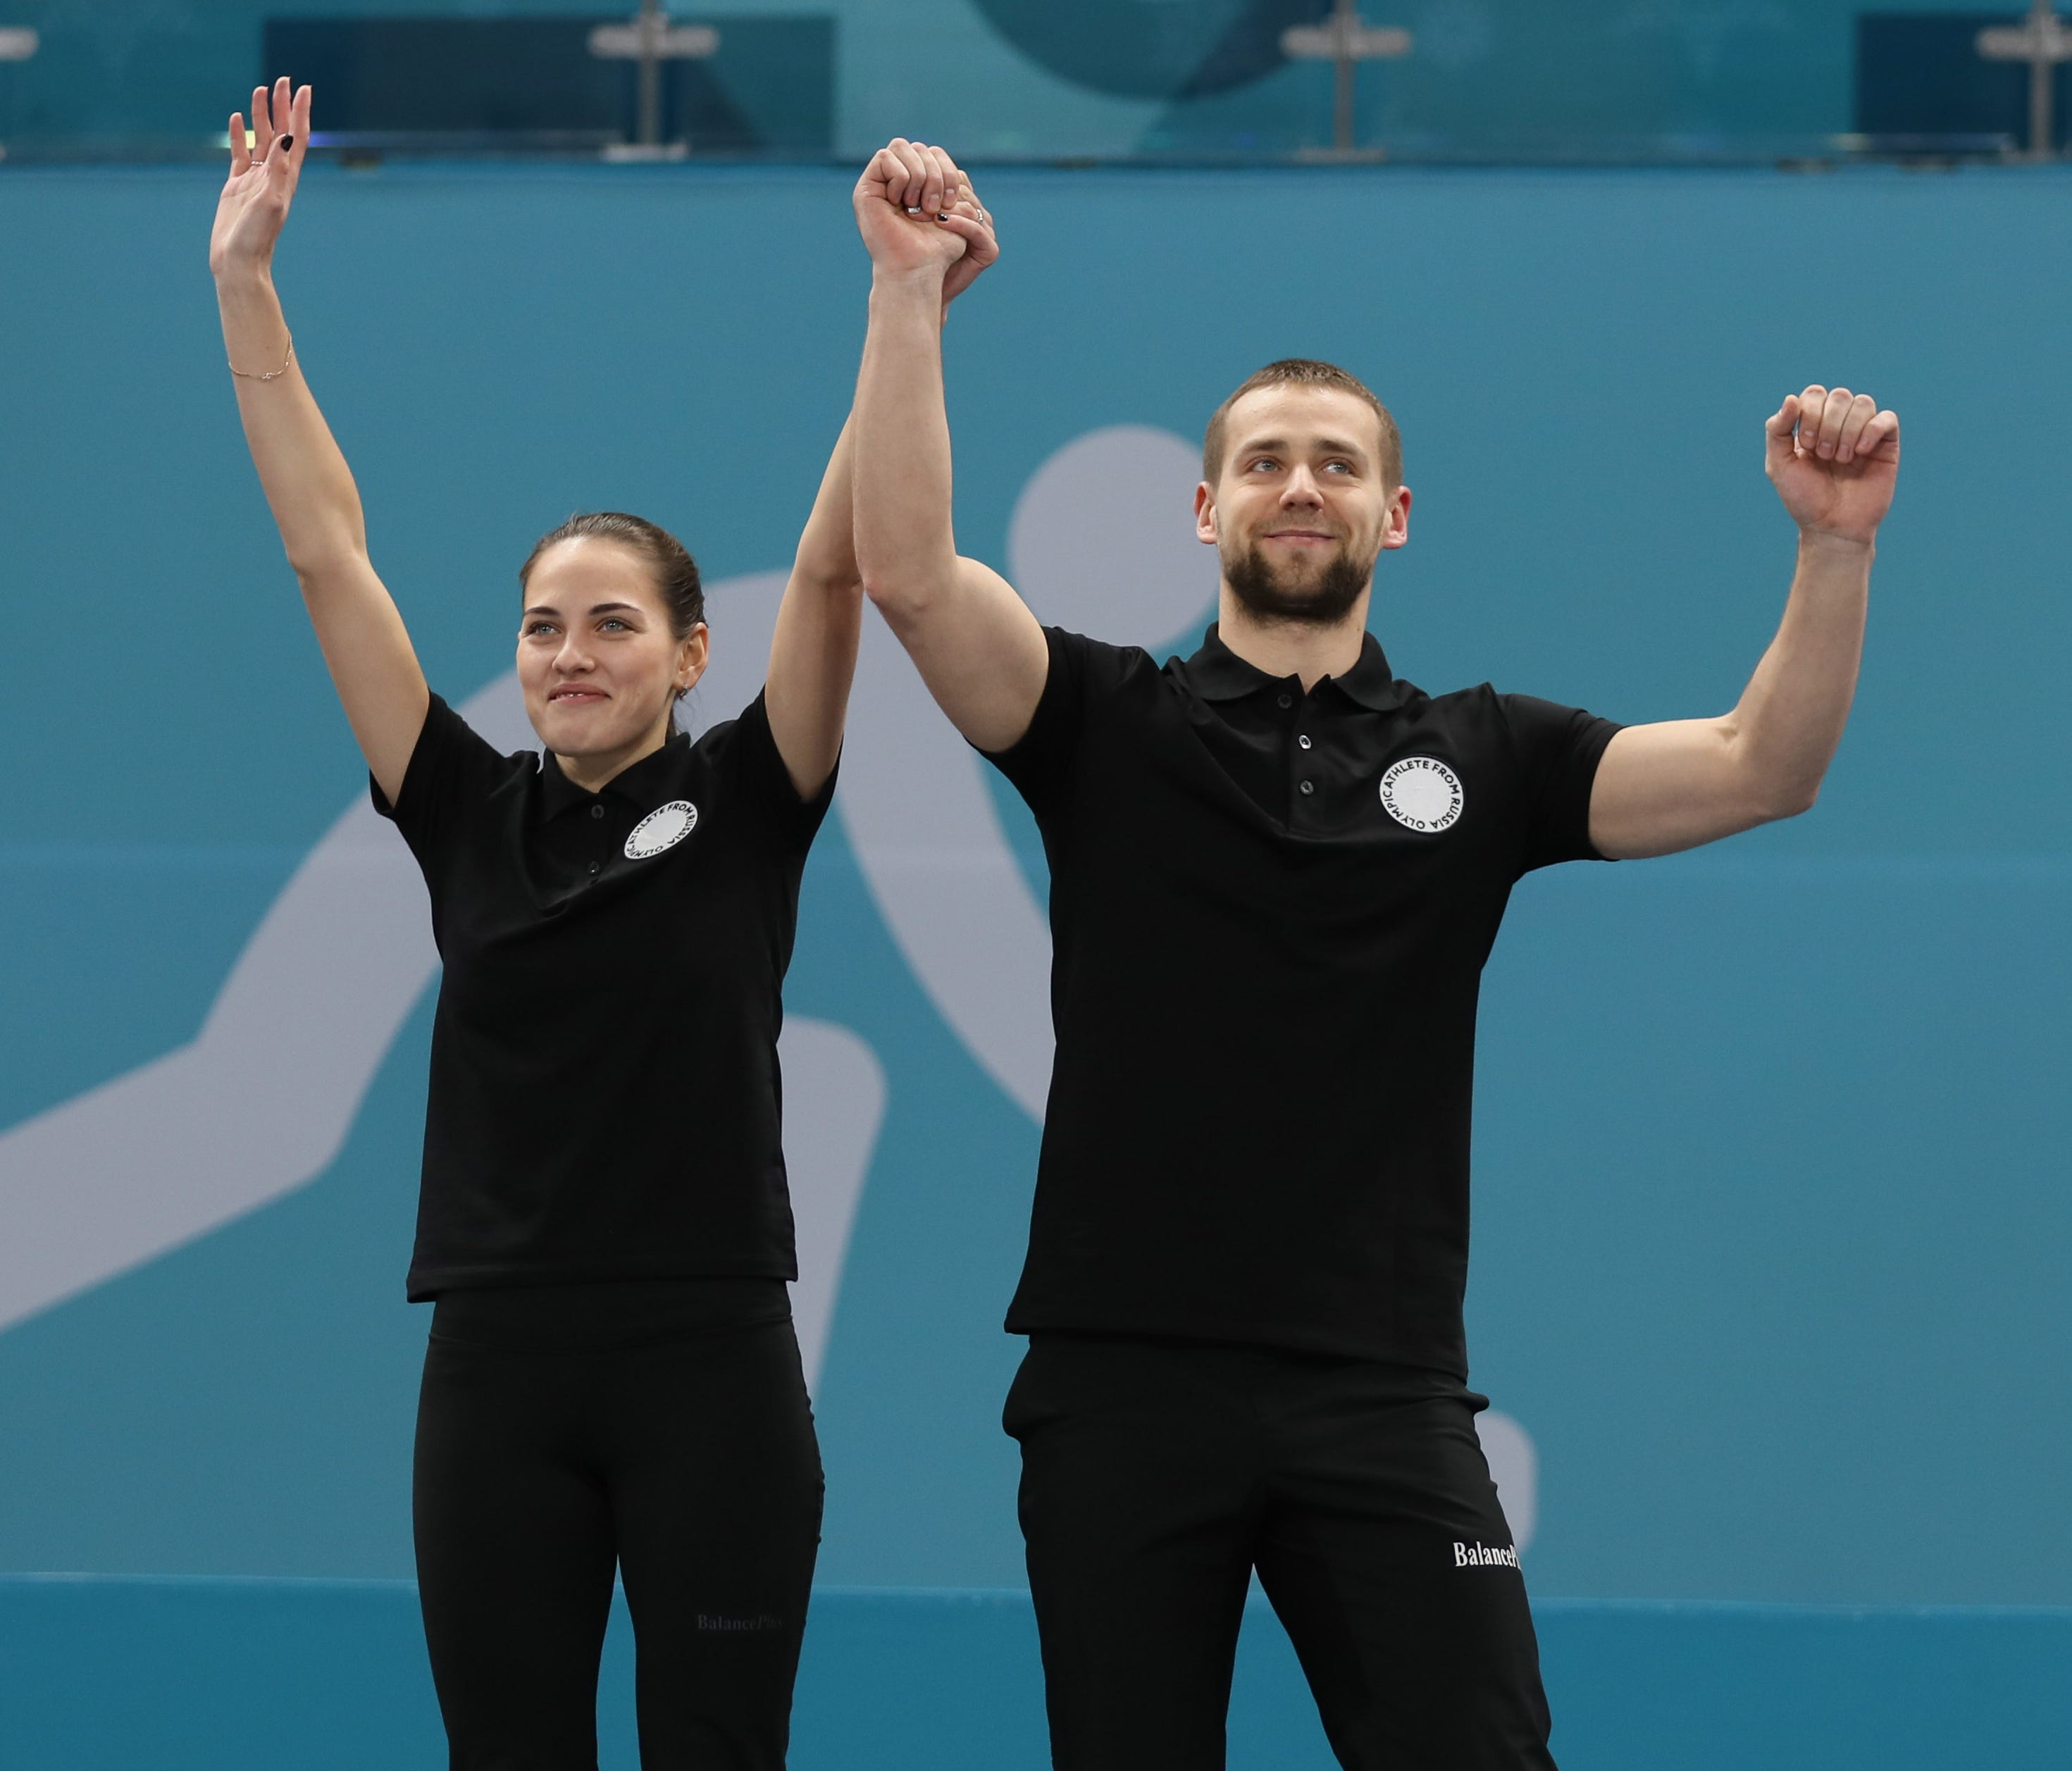 CAS has opened an investigation into a positive doping test for  Aleksandr Krushelnitckii of Olympic Athletes From Russia. He won bronze in mixed doubles curling with his wife, Anastasia Bryzgalova.